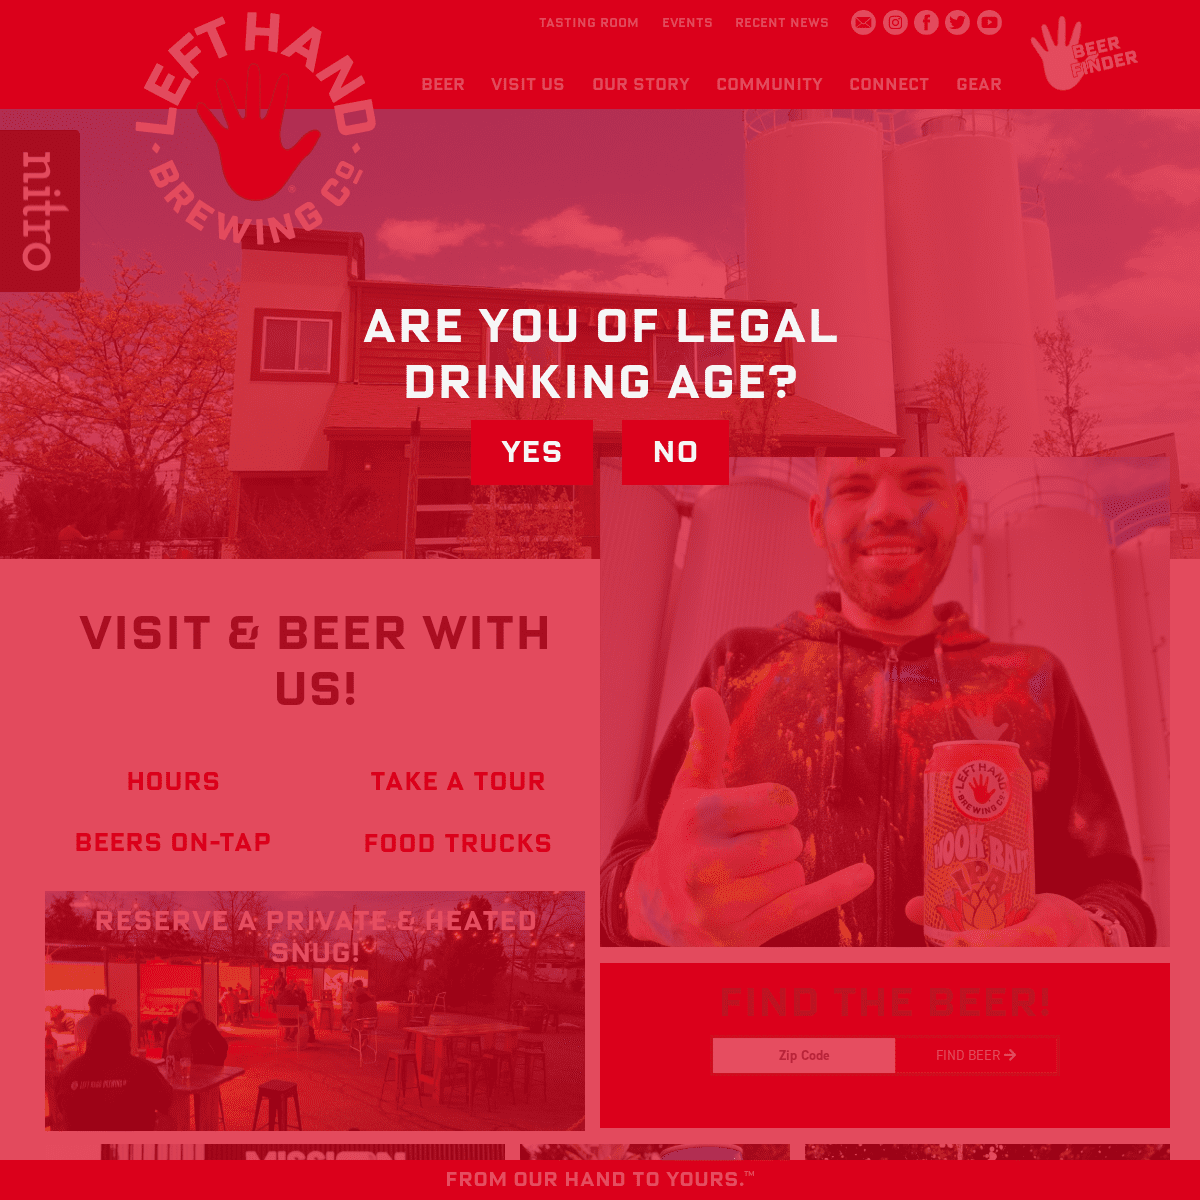 A complete backup of https://lefthandbrewing.com